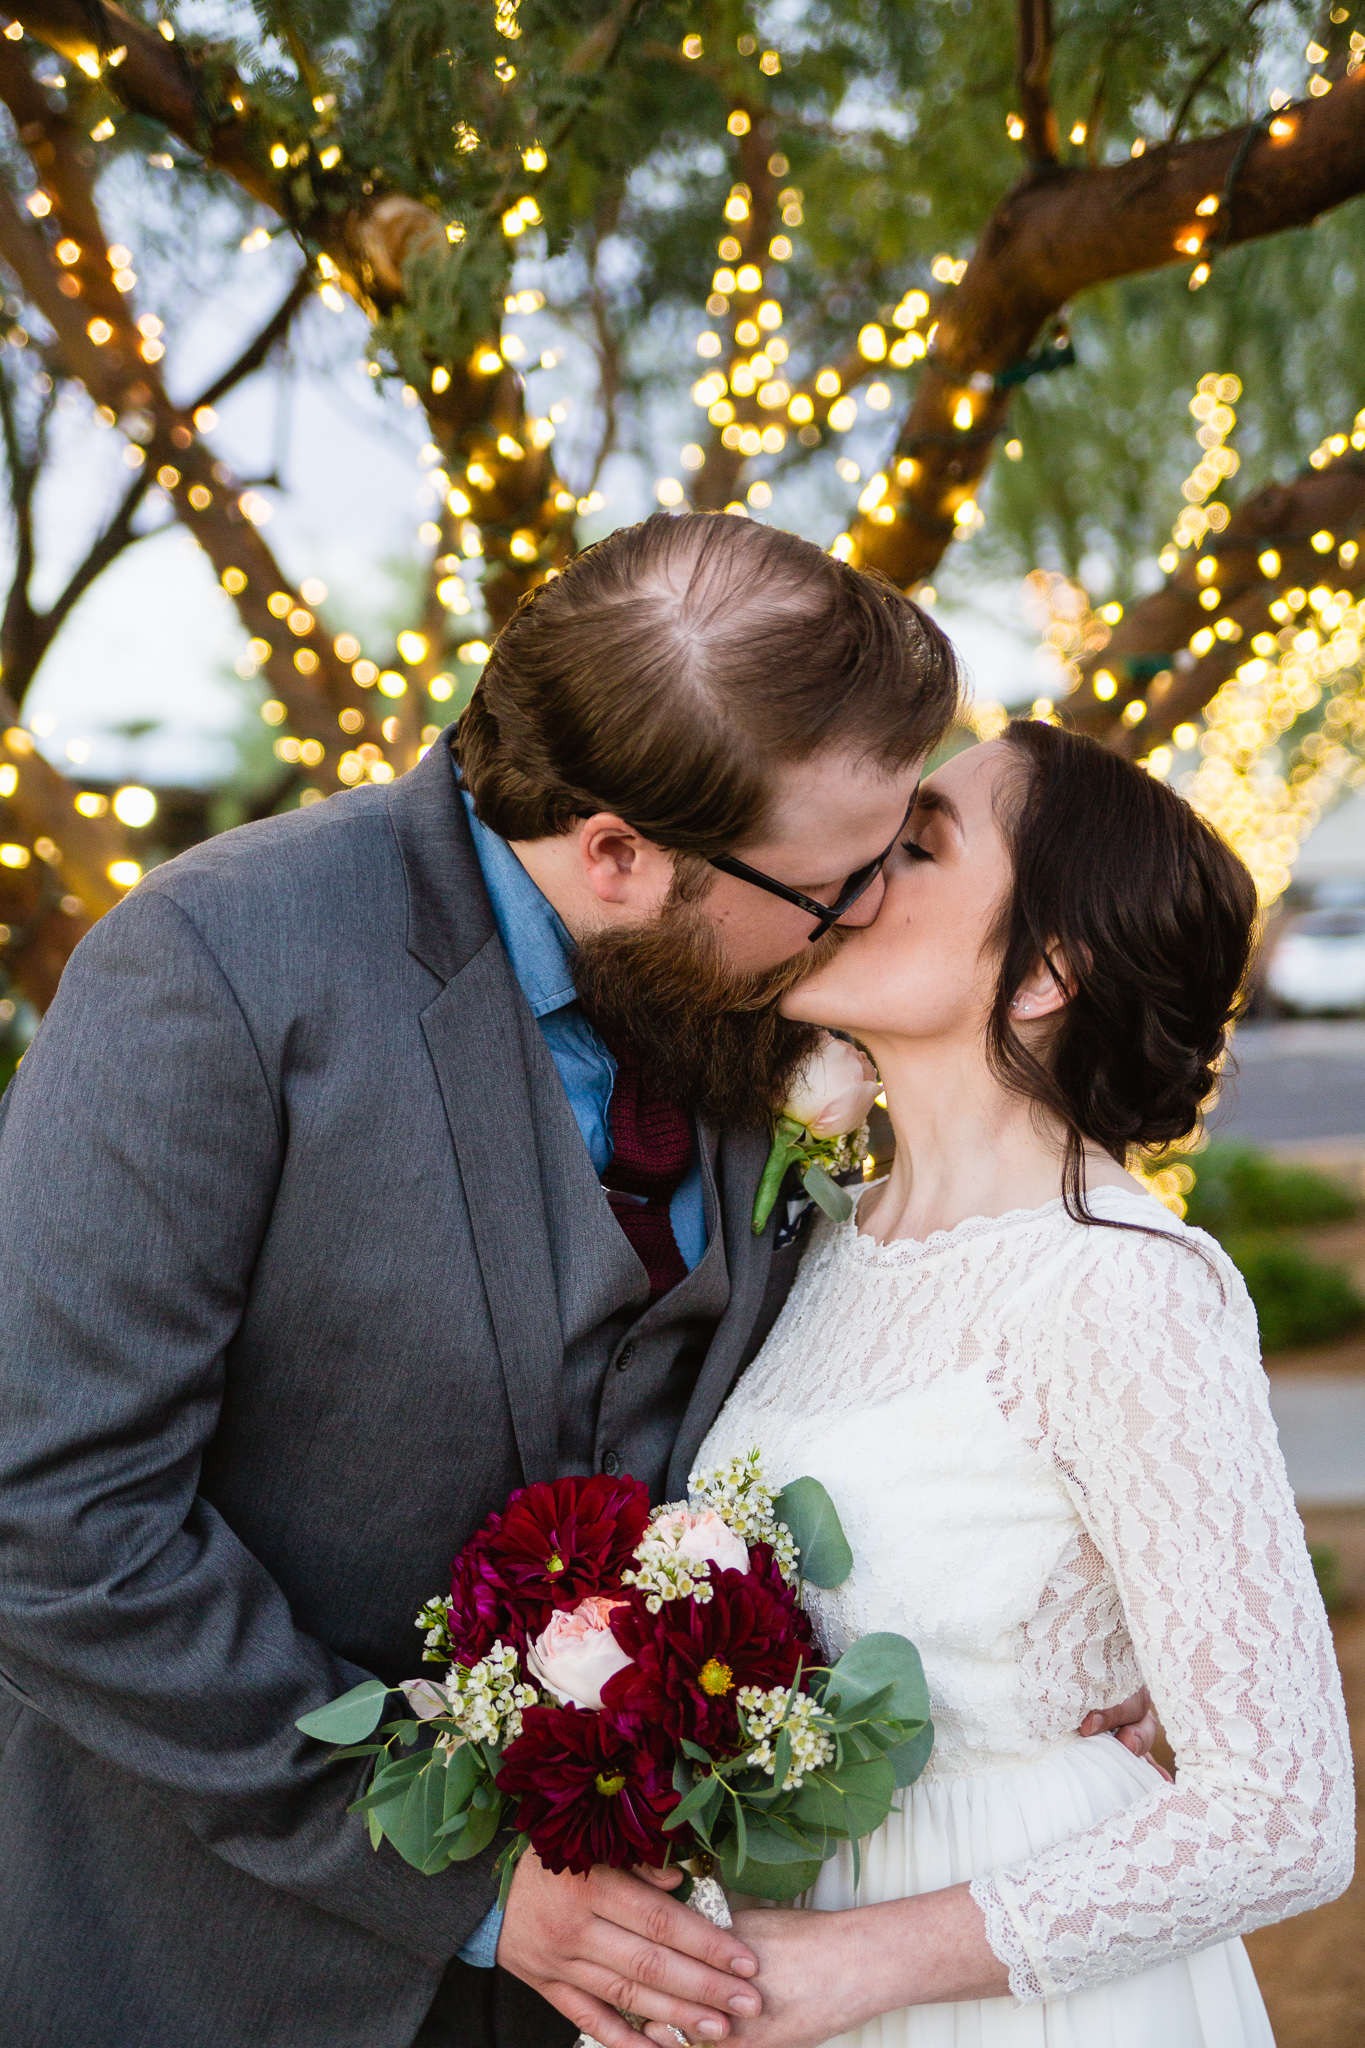 Vintage inspired bride and groom sharing a kiss in front of Christmas lights at their winter wedding.